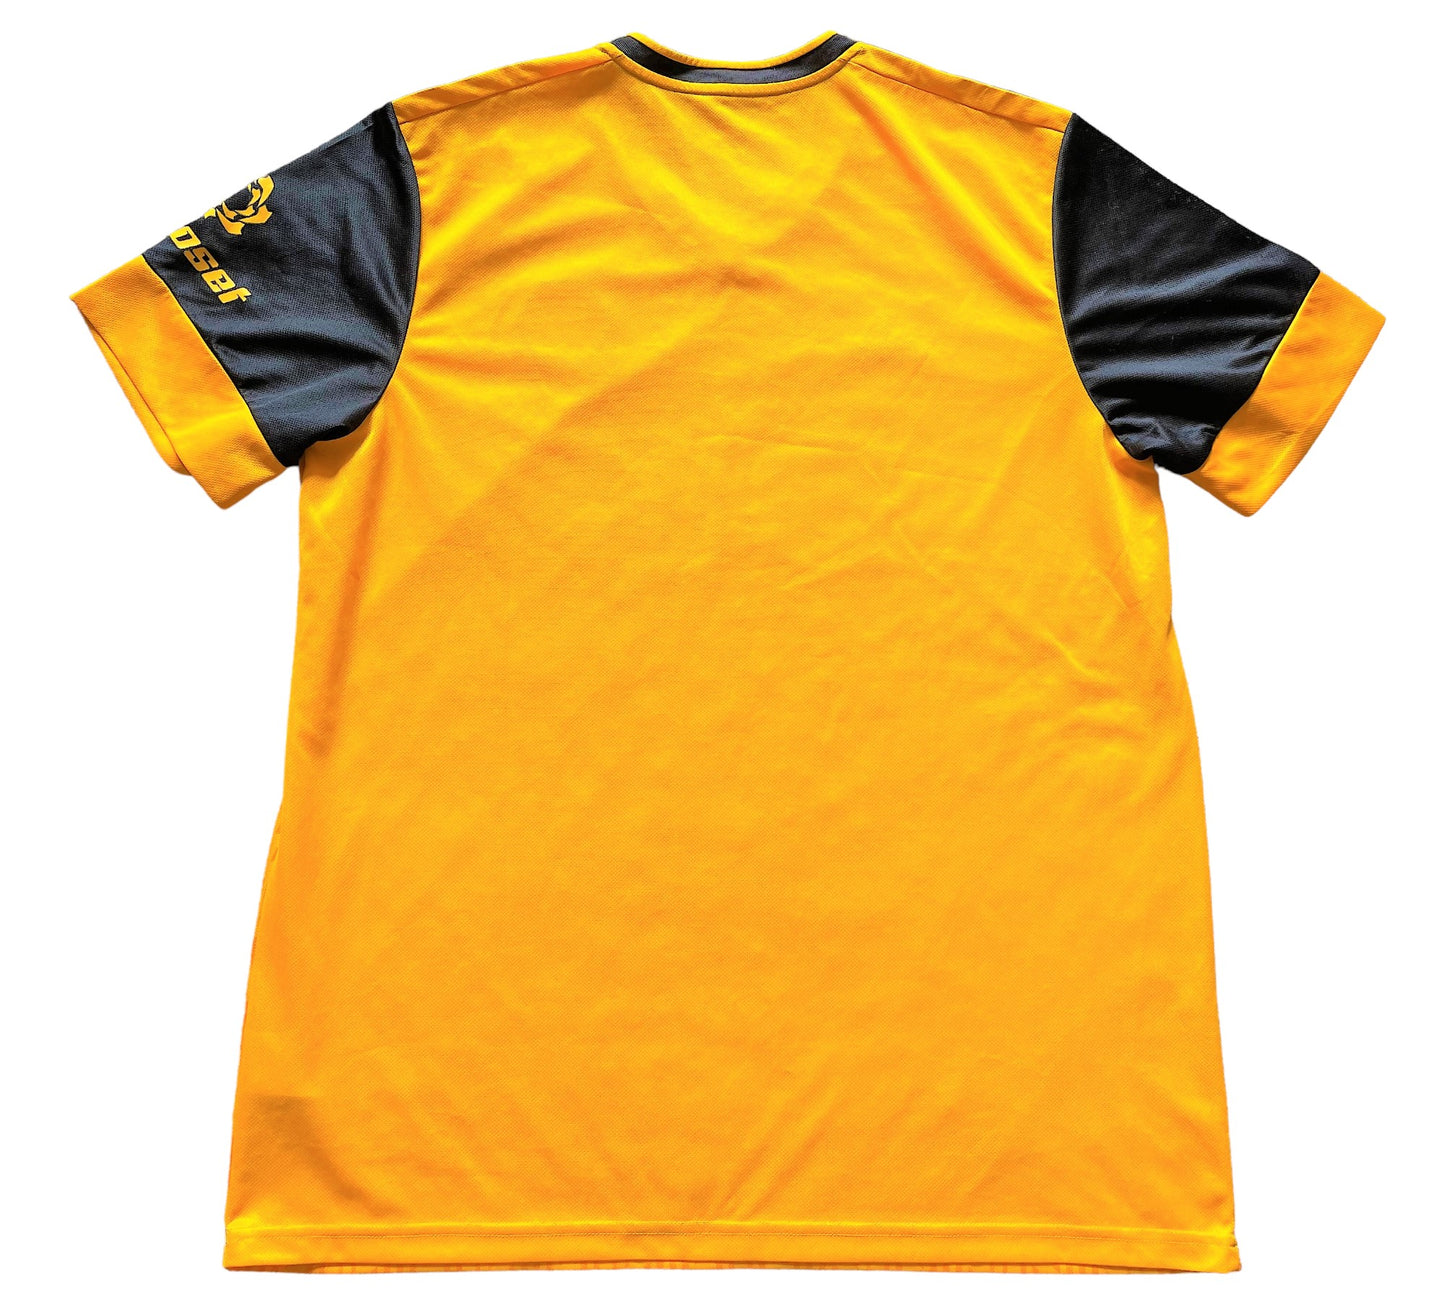 Wolves 2020 Home Shirt (excellent) Adults XL. Height 26 inches.